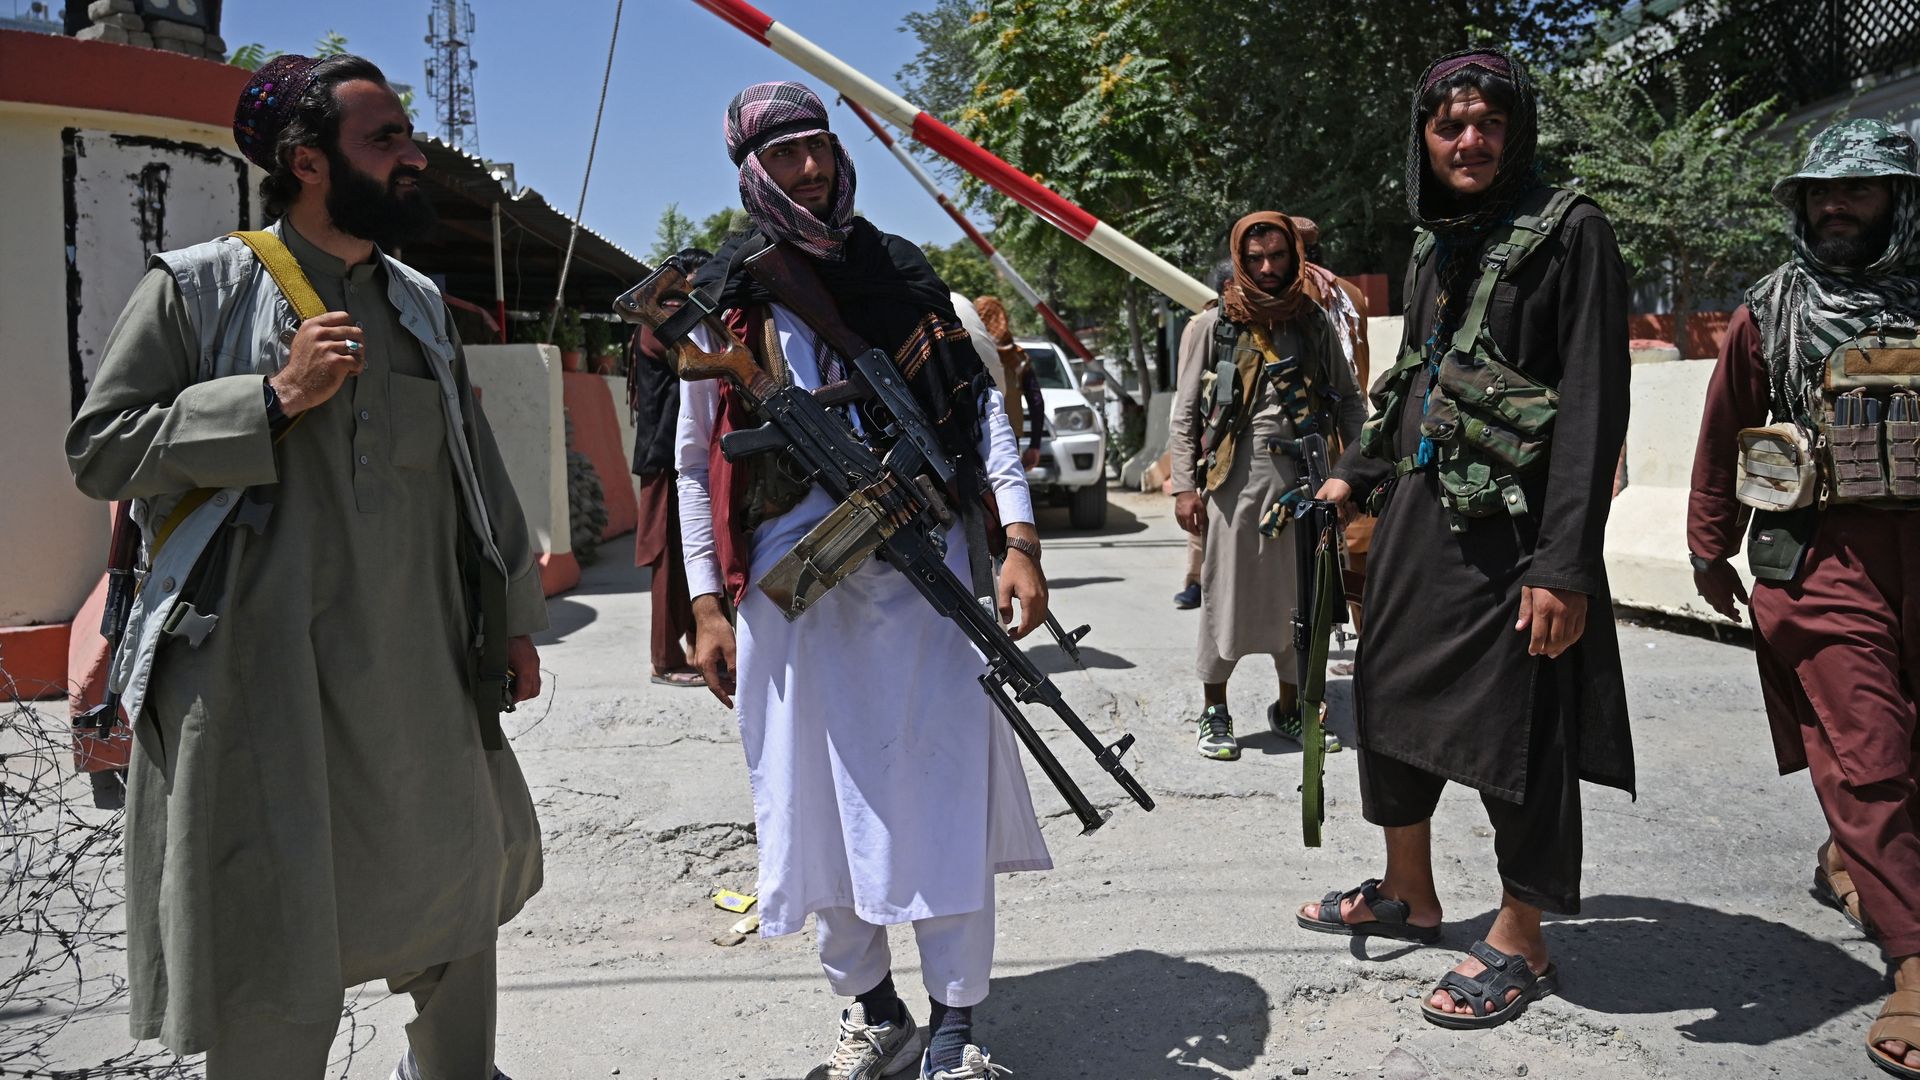  Taliban fighters stand guard along a roadside near the Zanbaq Square in Kabul on August 16